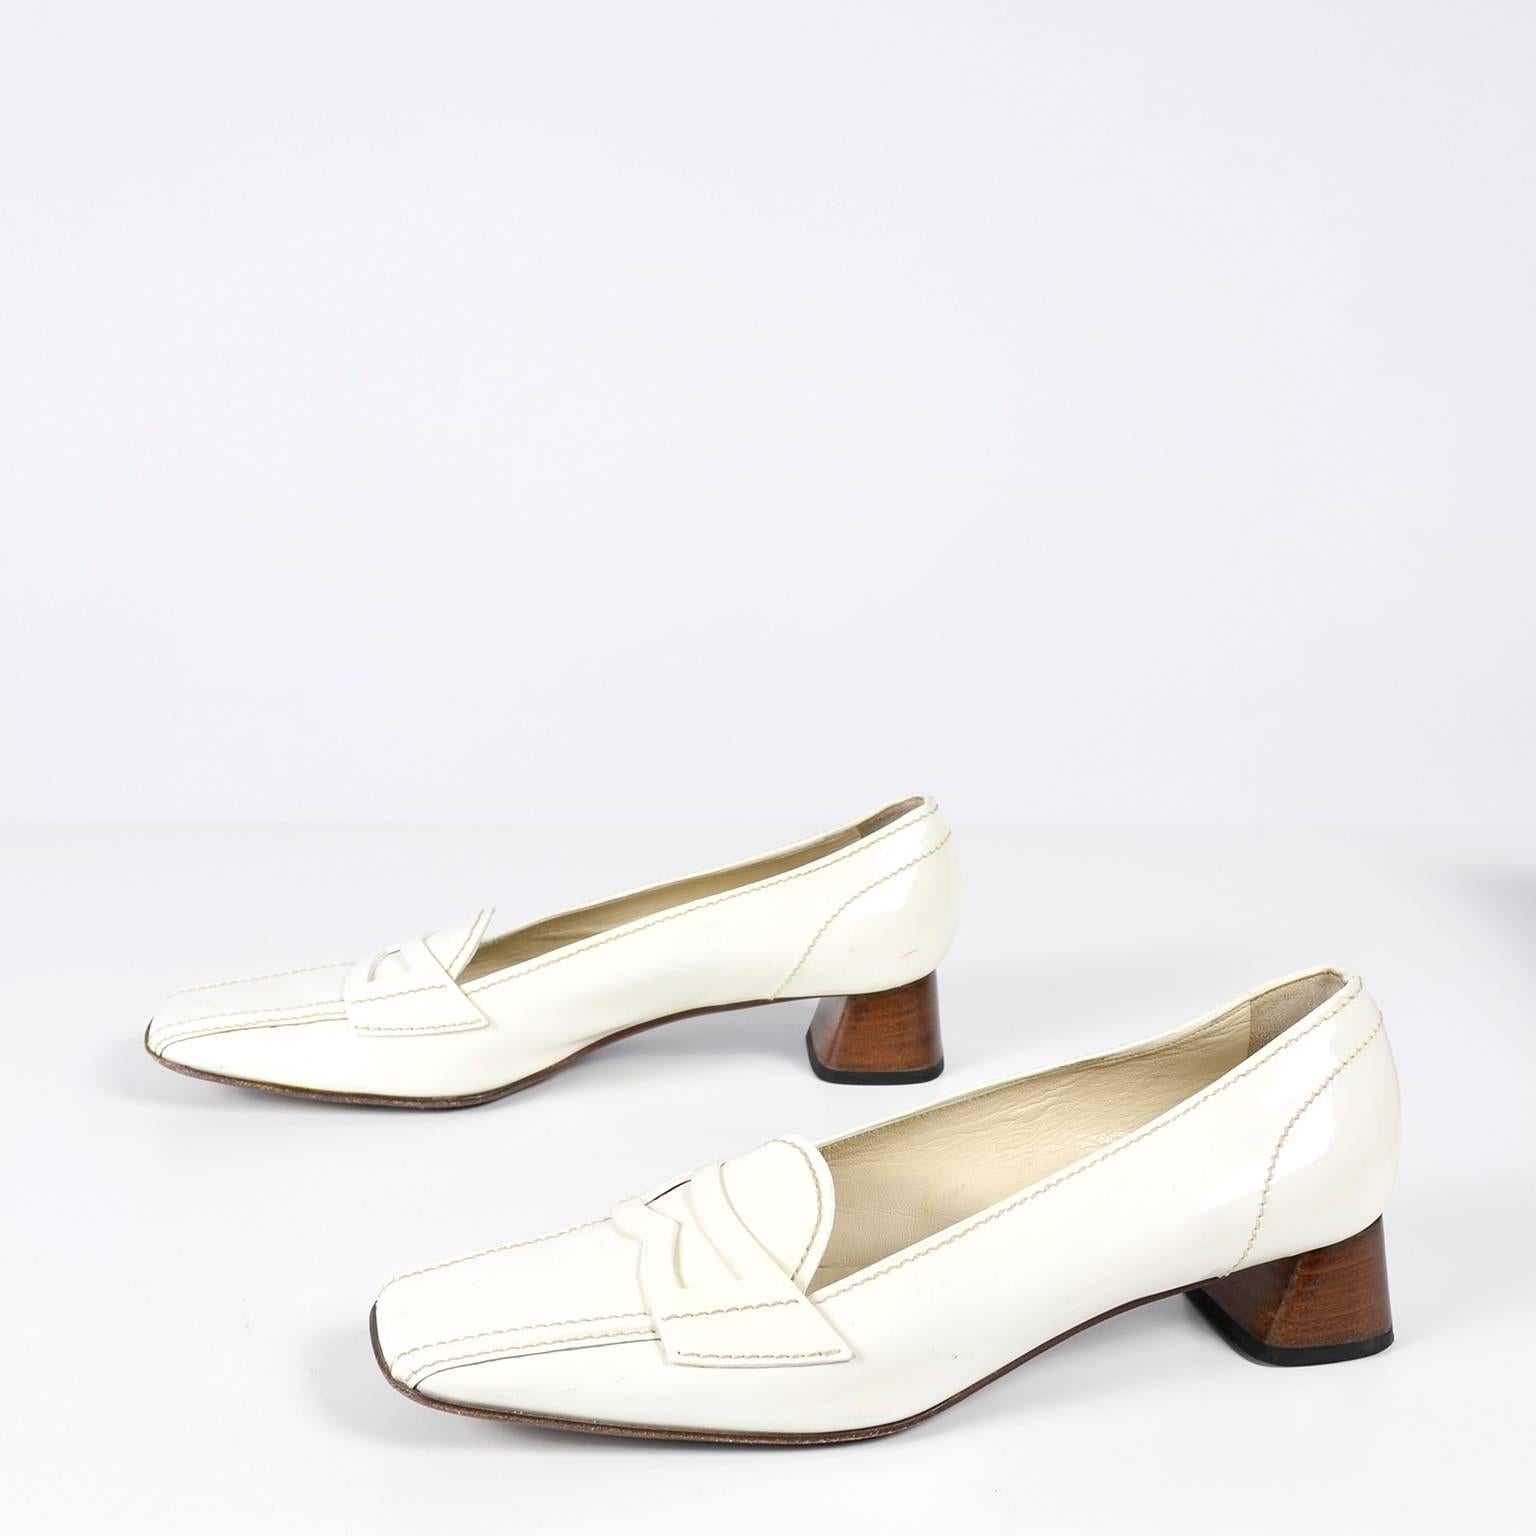 These vintage Prada shoes are in ivory patent leather have great squared toes and wood block heels.  They were made in Italy and are a heeled loafer style.  The shoes are labeled a size 39.5 and measure 3 and 1/4